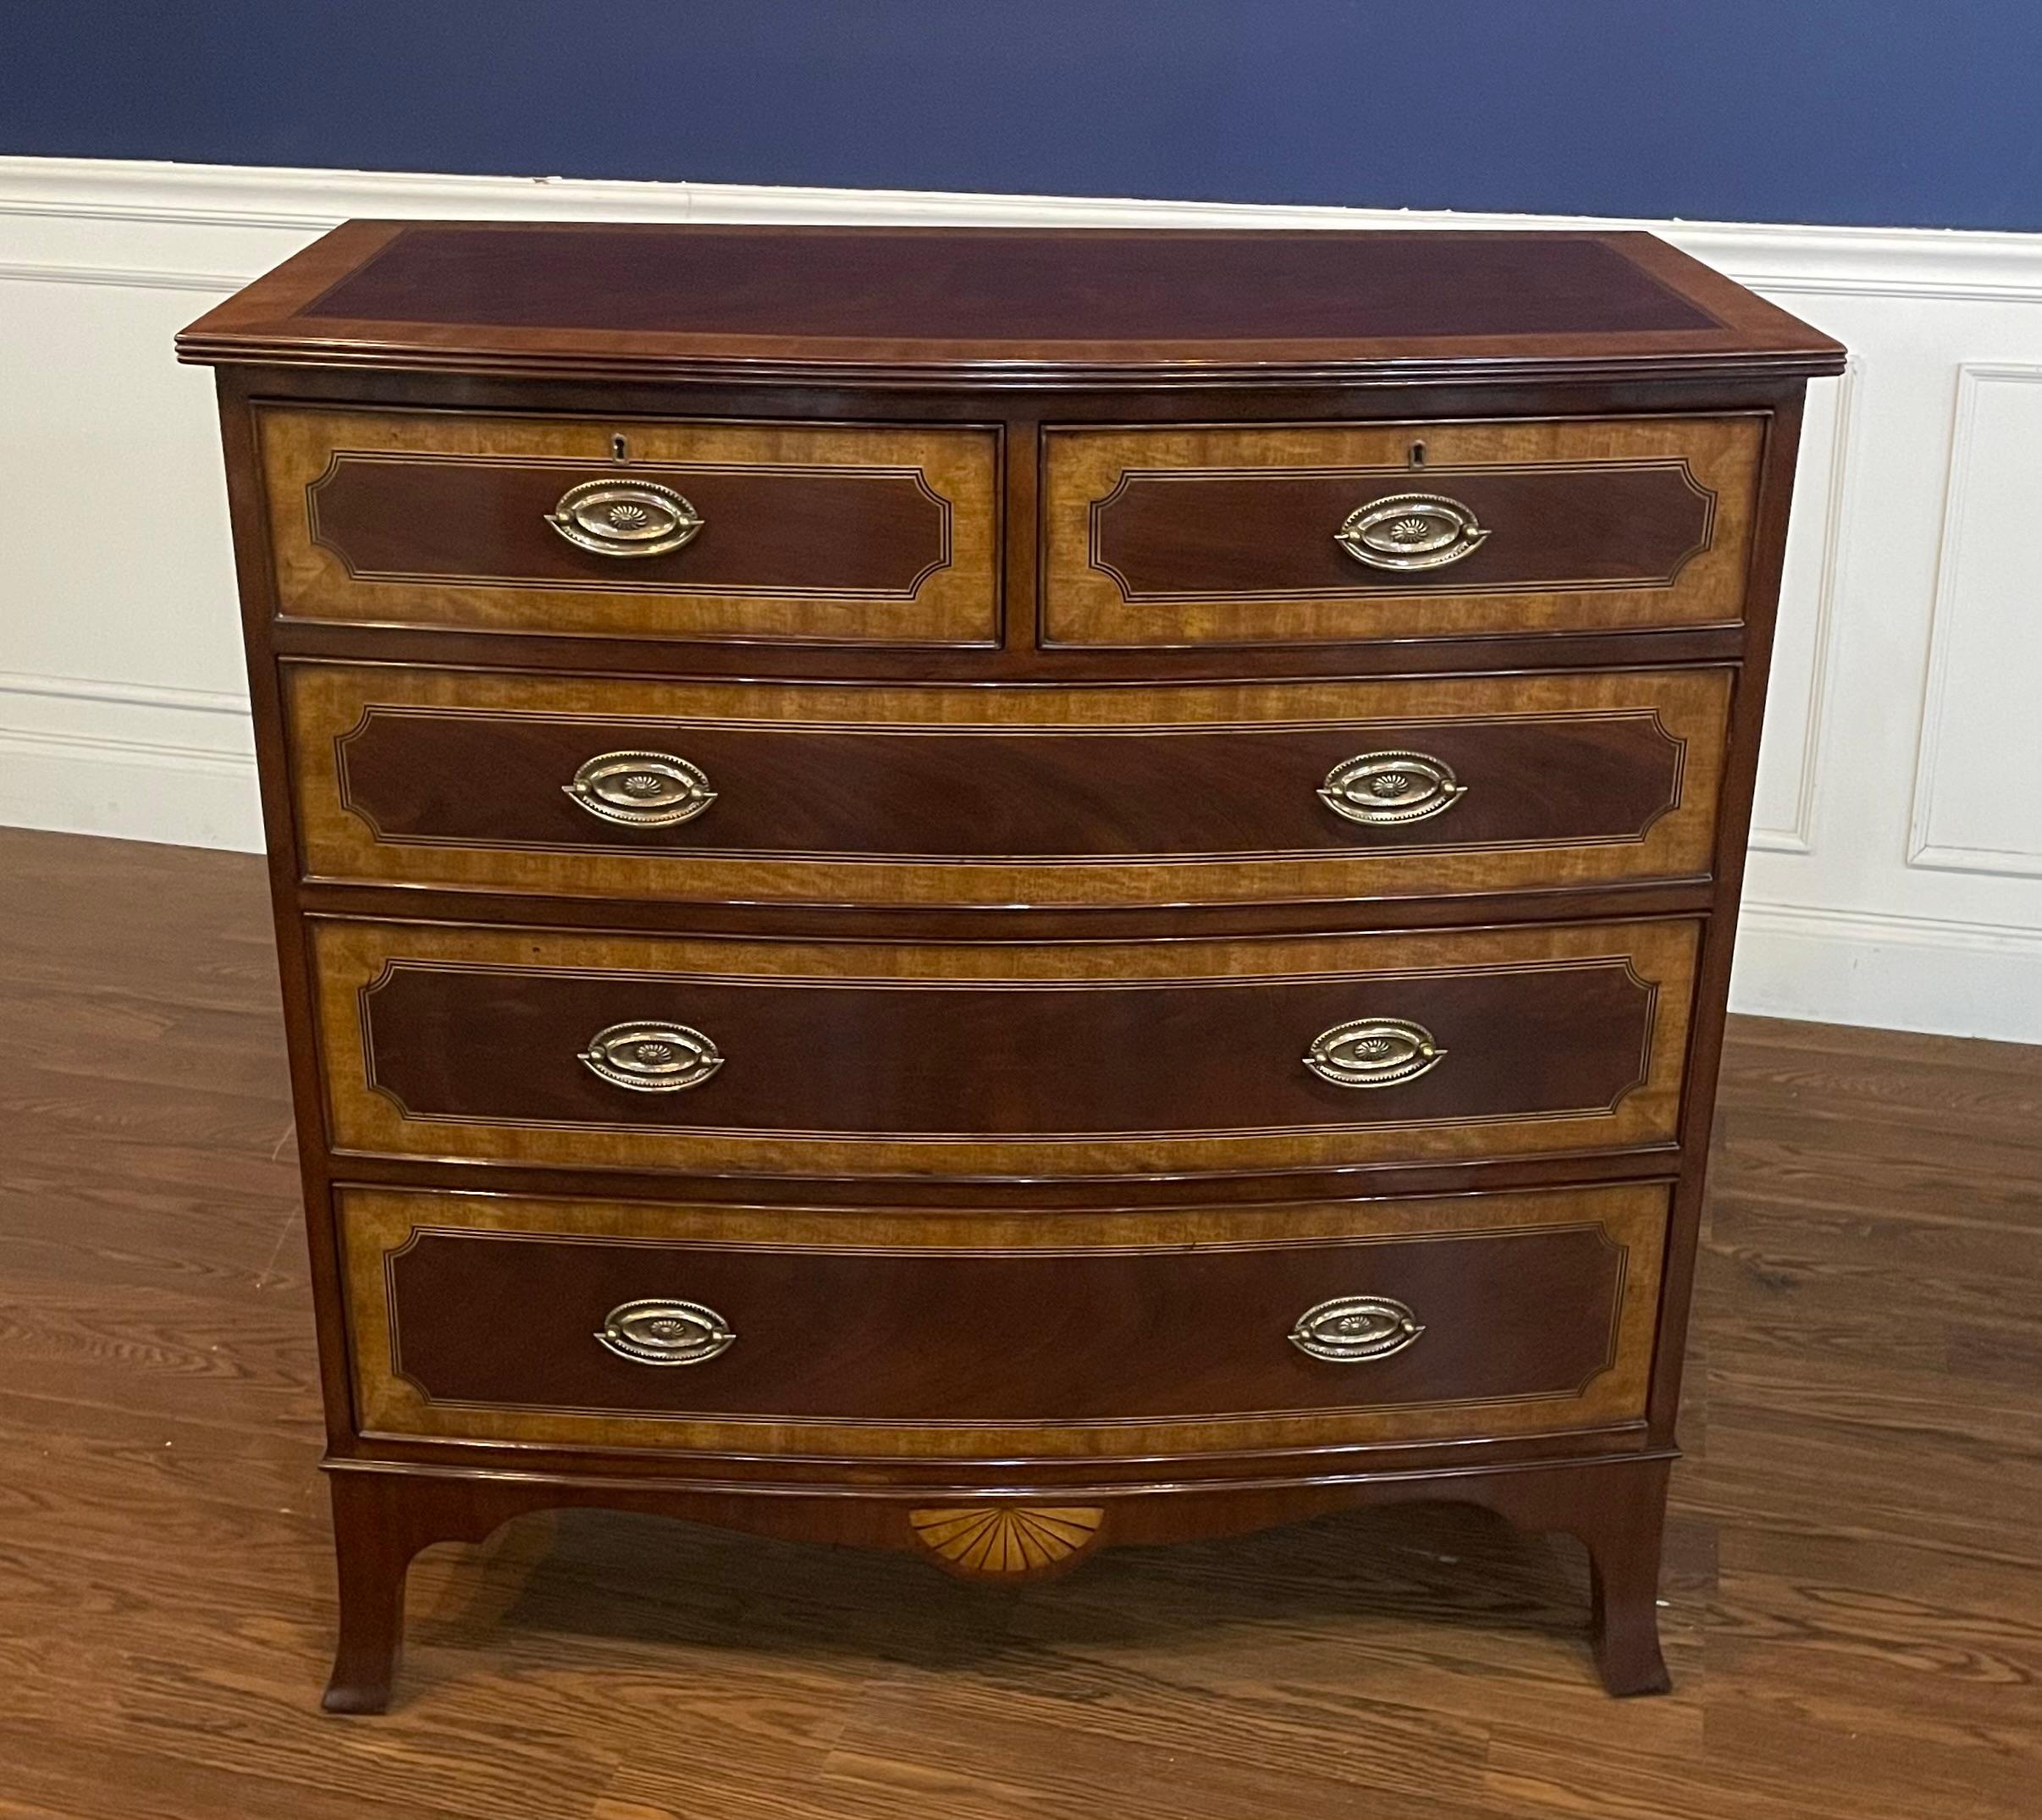 This is a classic mahogany inlaid bow front chest by Leighton Hall. Its design was inspired by chests from the early 1800s. It features five drawers, solid brass hardware and faux key holes. The drawer fronts have swirly crotch mahogany oval fields